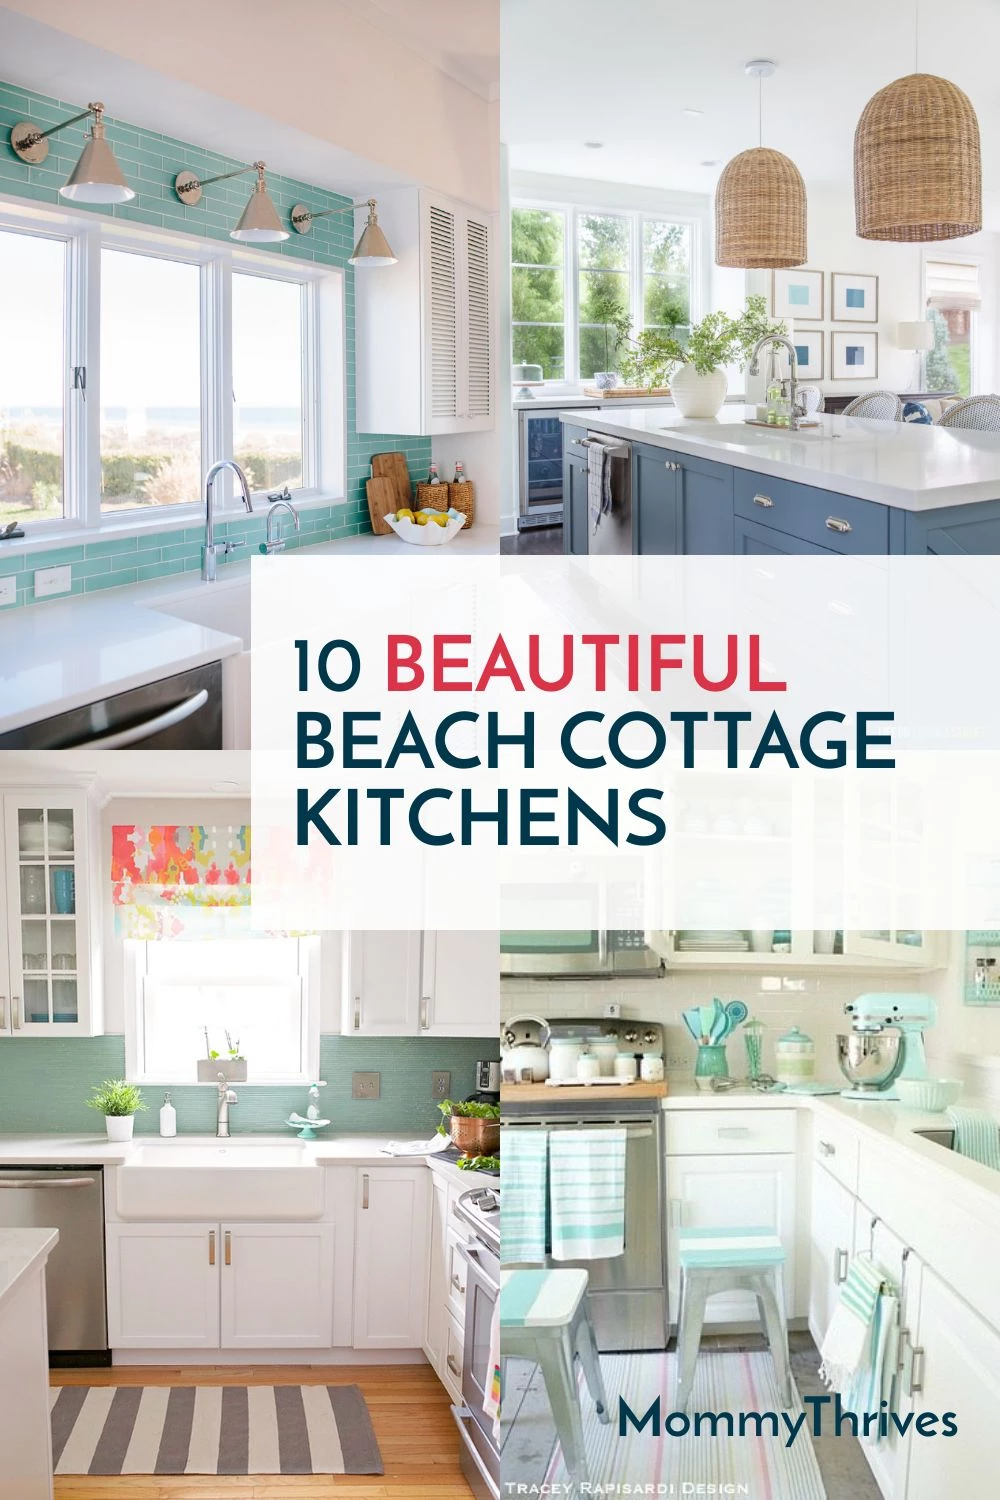 18 Beautiful Beach Cottage Kitchens   MommyThrives